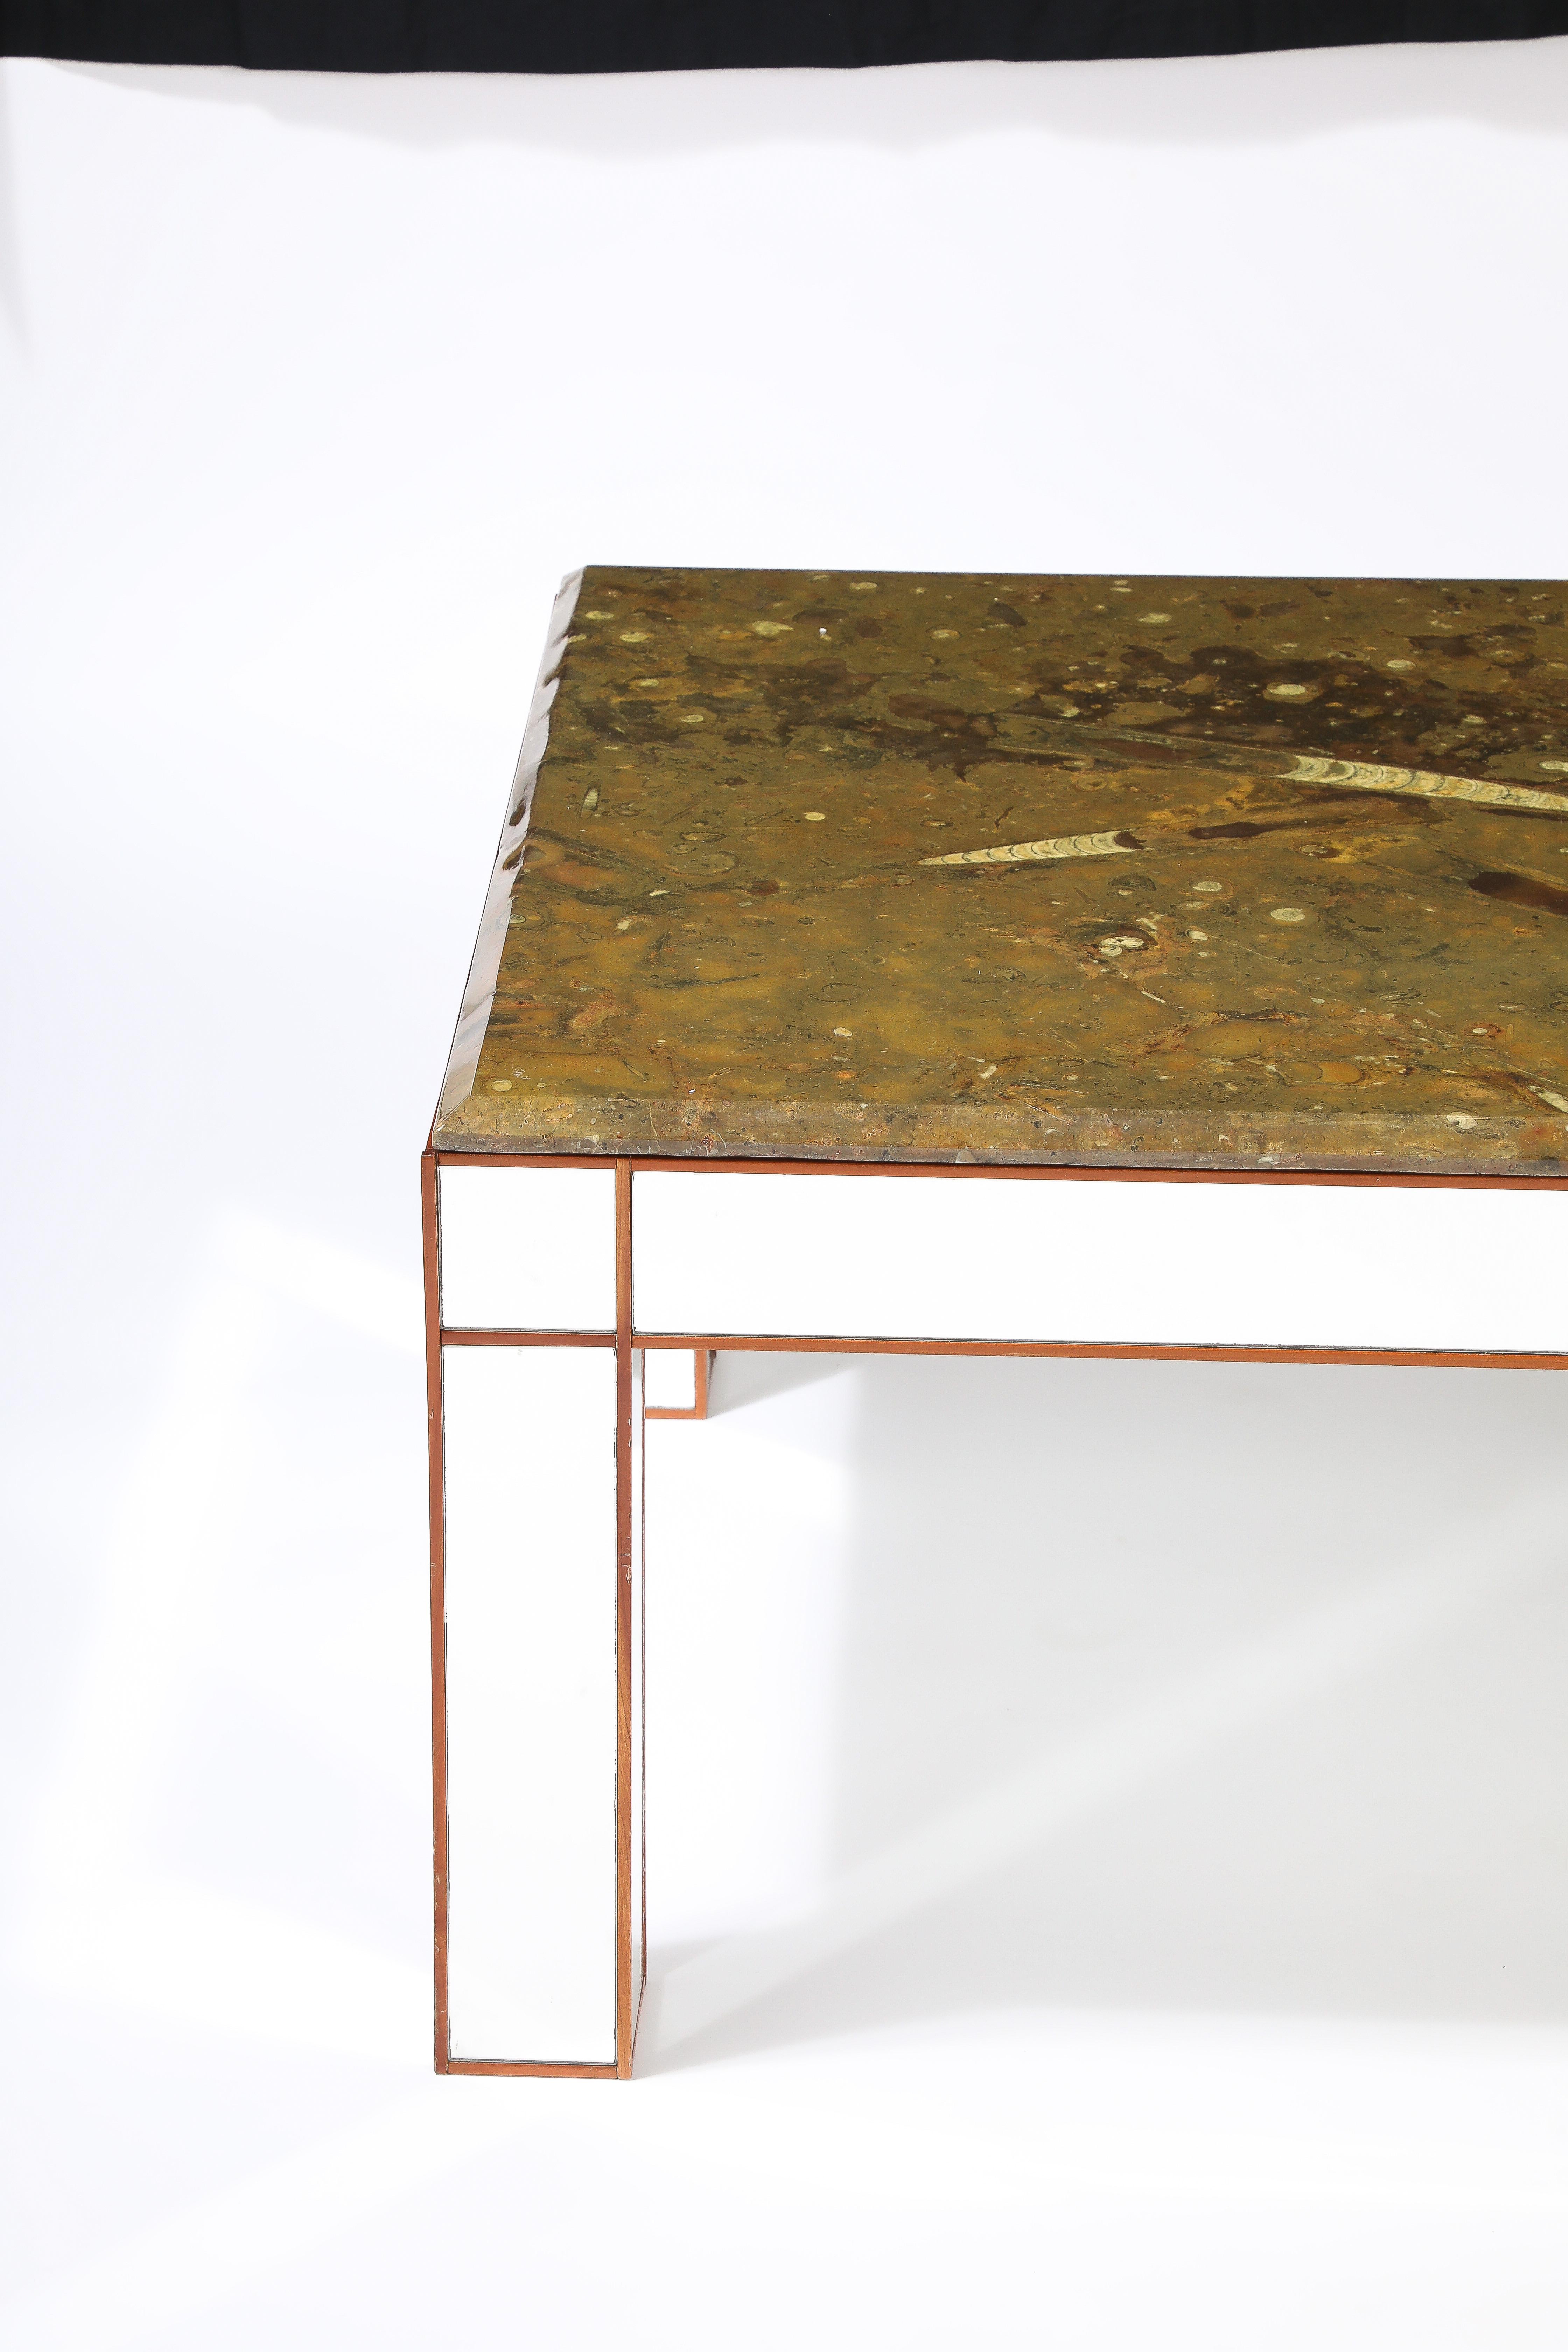 An exceptional Italian modernist fossilized marble cocktail table.  The large polished marble top containing embedded ammonite and orthoceras fossils dating back to the Pre-historic era. The quantity and coloration of the fossils in this marble is